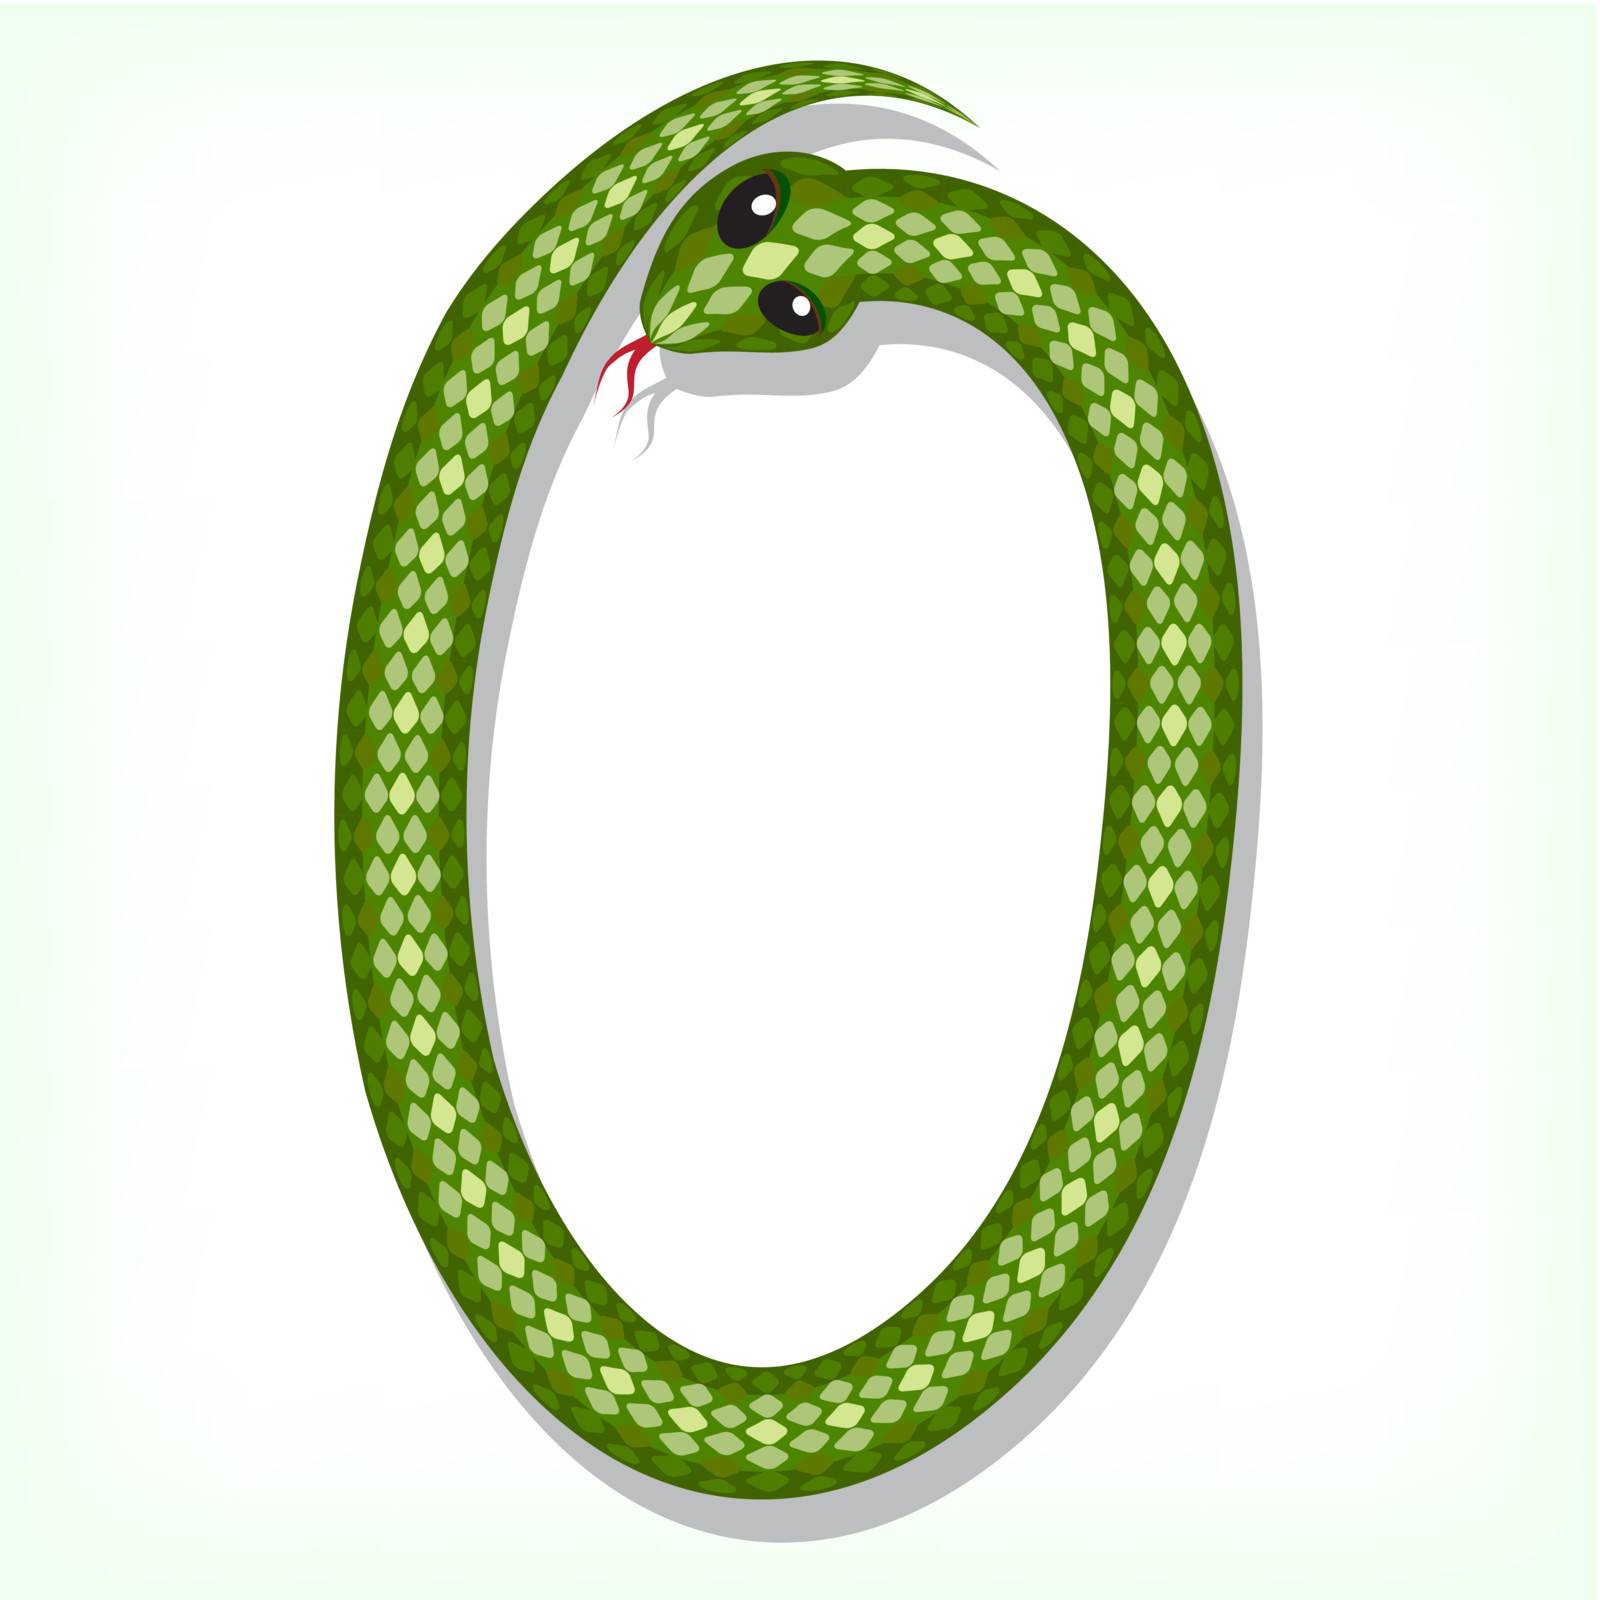 Font made from green snake. Digit 0